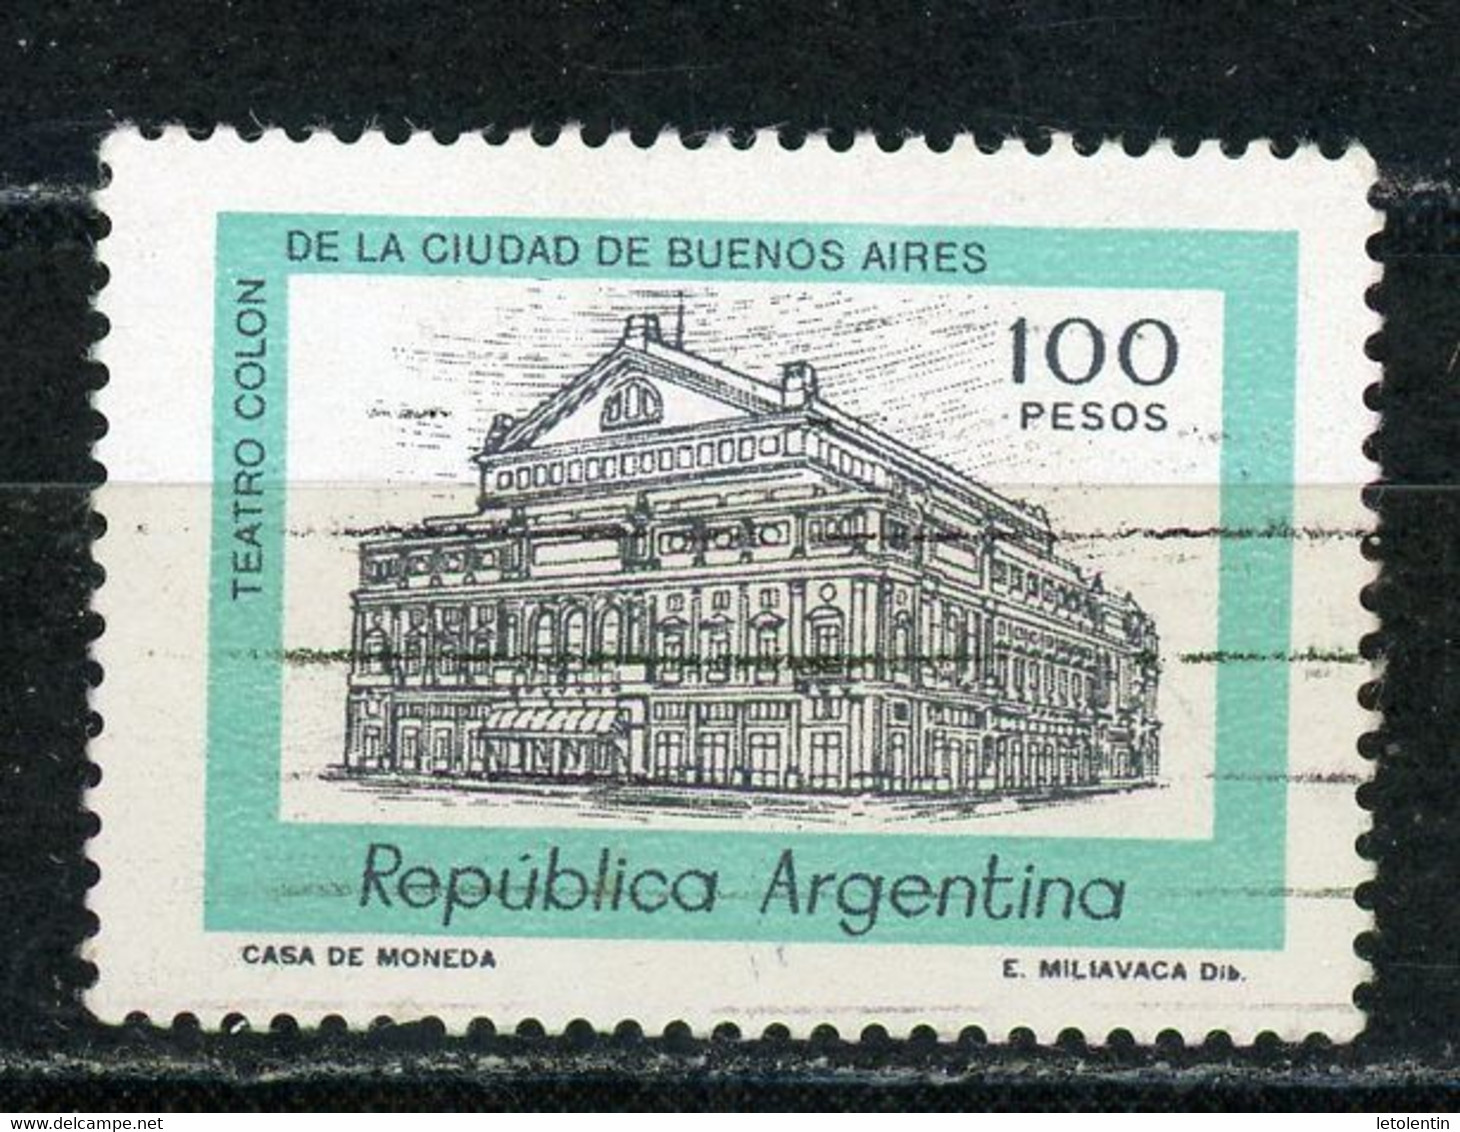 ARGENTINE - ARCHITECTURE - N° Yvert 1244 Obli. - Used Stamps